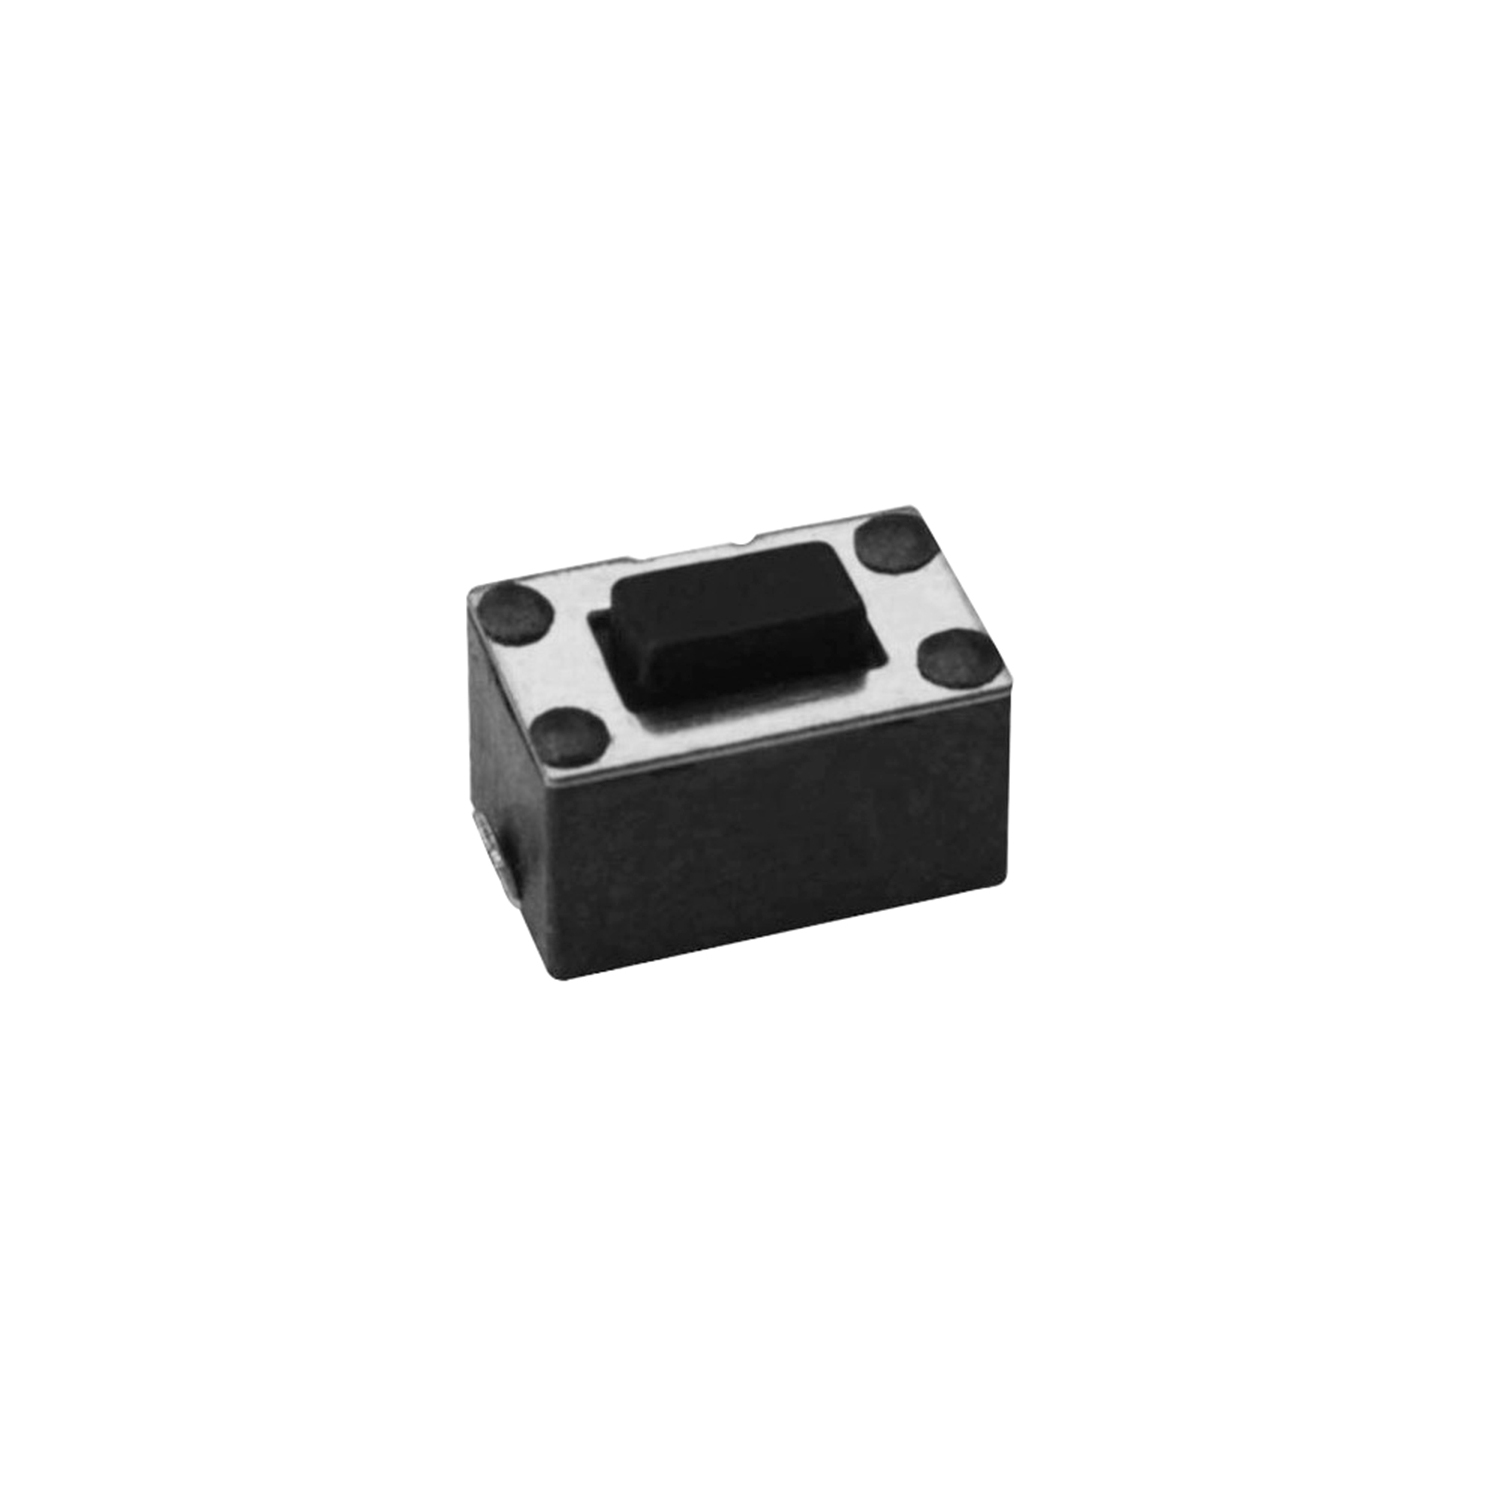 Replacement Home Button Switch For Nintendo 3DS XL